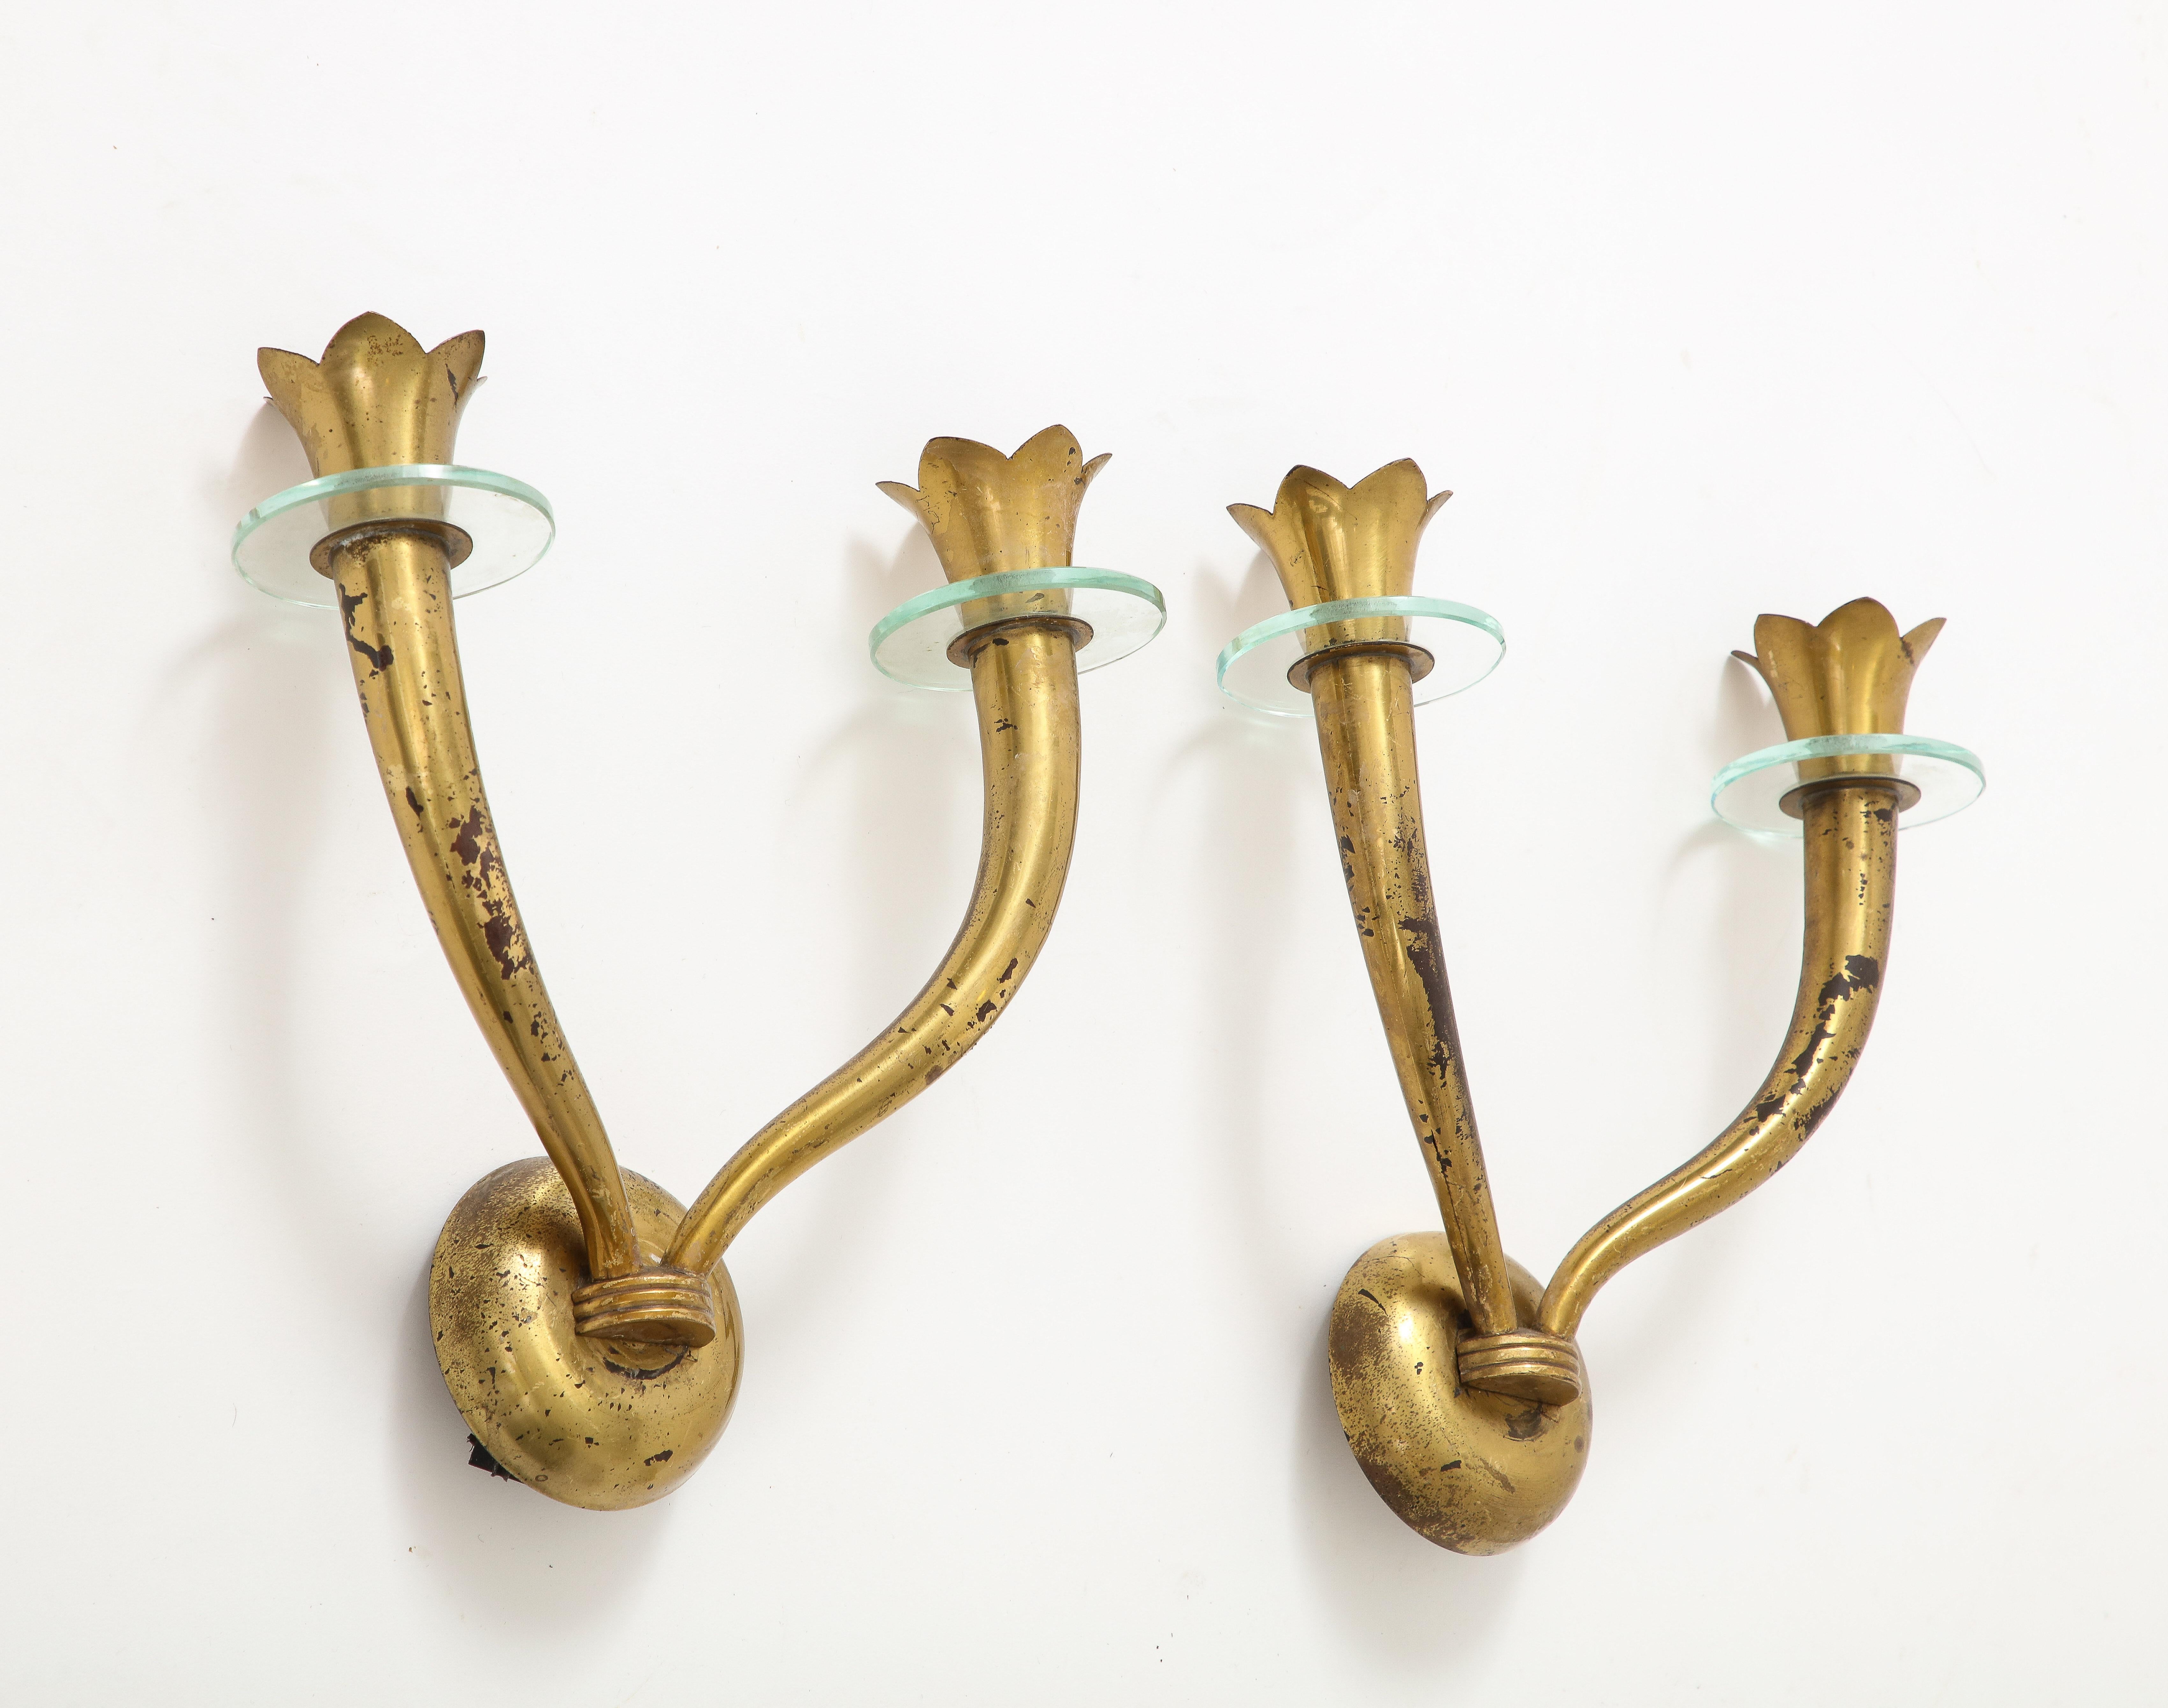 Pair of midcentury brass and glass Italian sconces attributed to Emlion Lancia - Italy 1950s
European socket and wiring
Patina and fading on all surfaces, please check pictures.
Third sconce available.